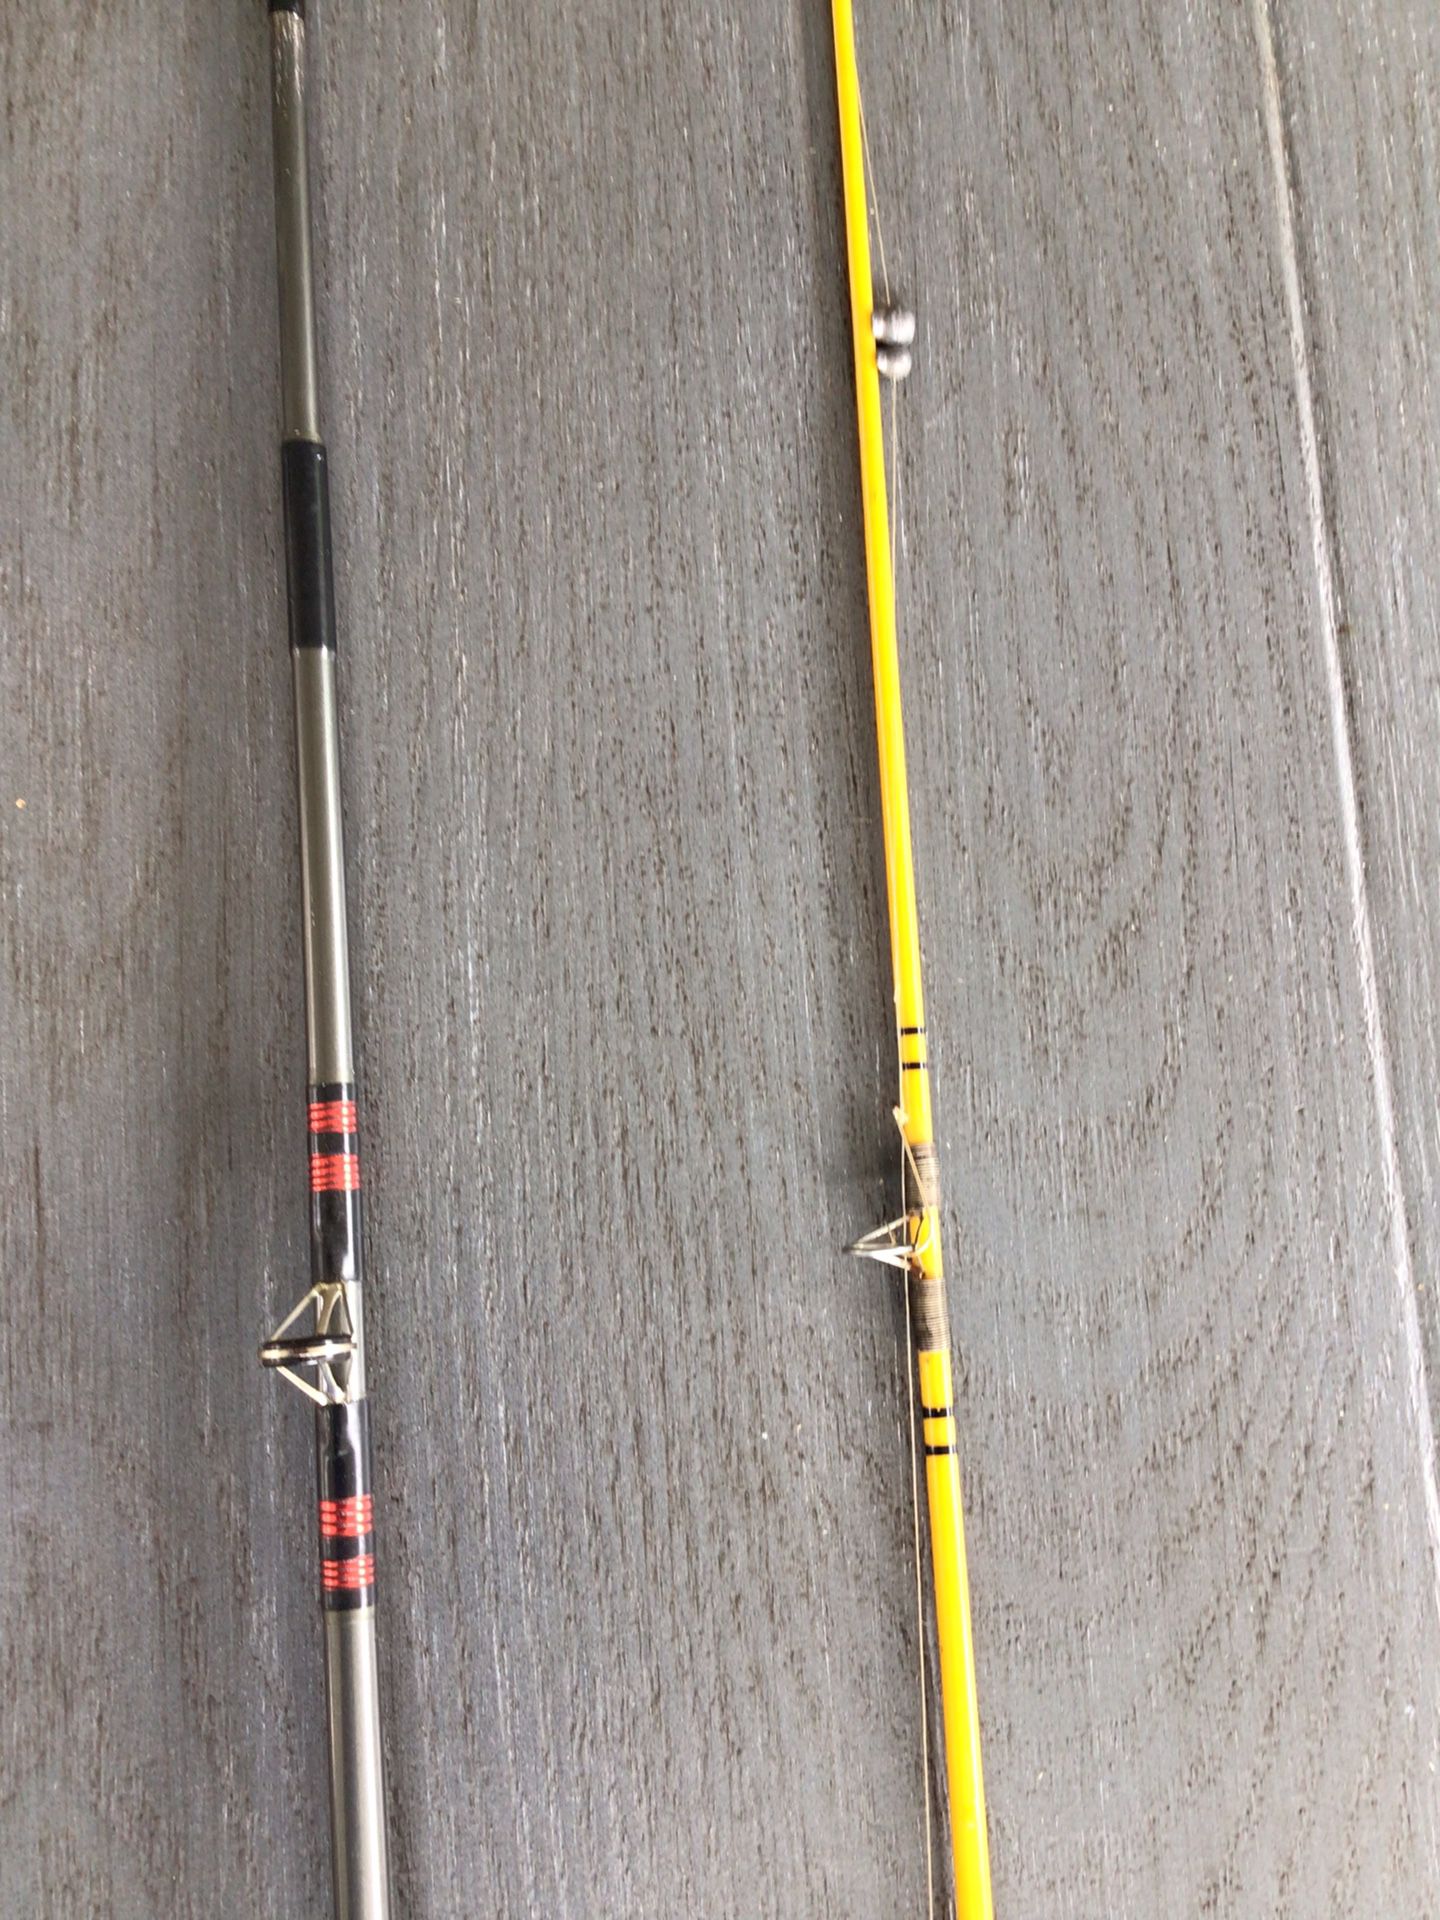 Vintage Fishing Rods & Reels Zebco Pro Staff Rod Zebco 202 Reel Garcia  Freshwater Casting Rod for Sale in Naperville, IL - OfferUp